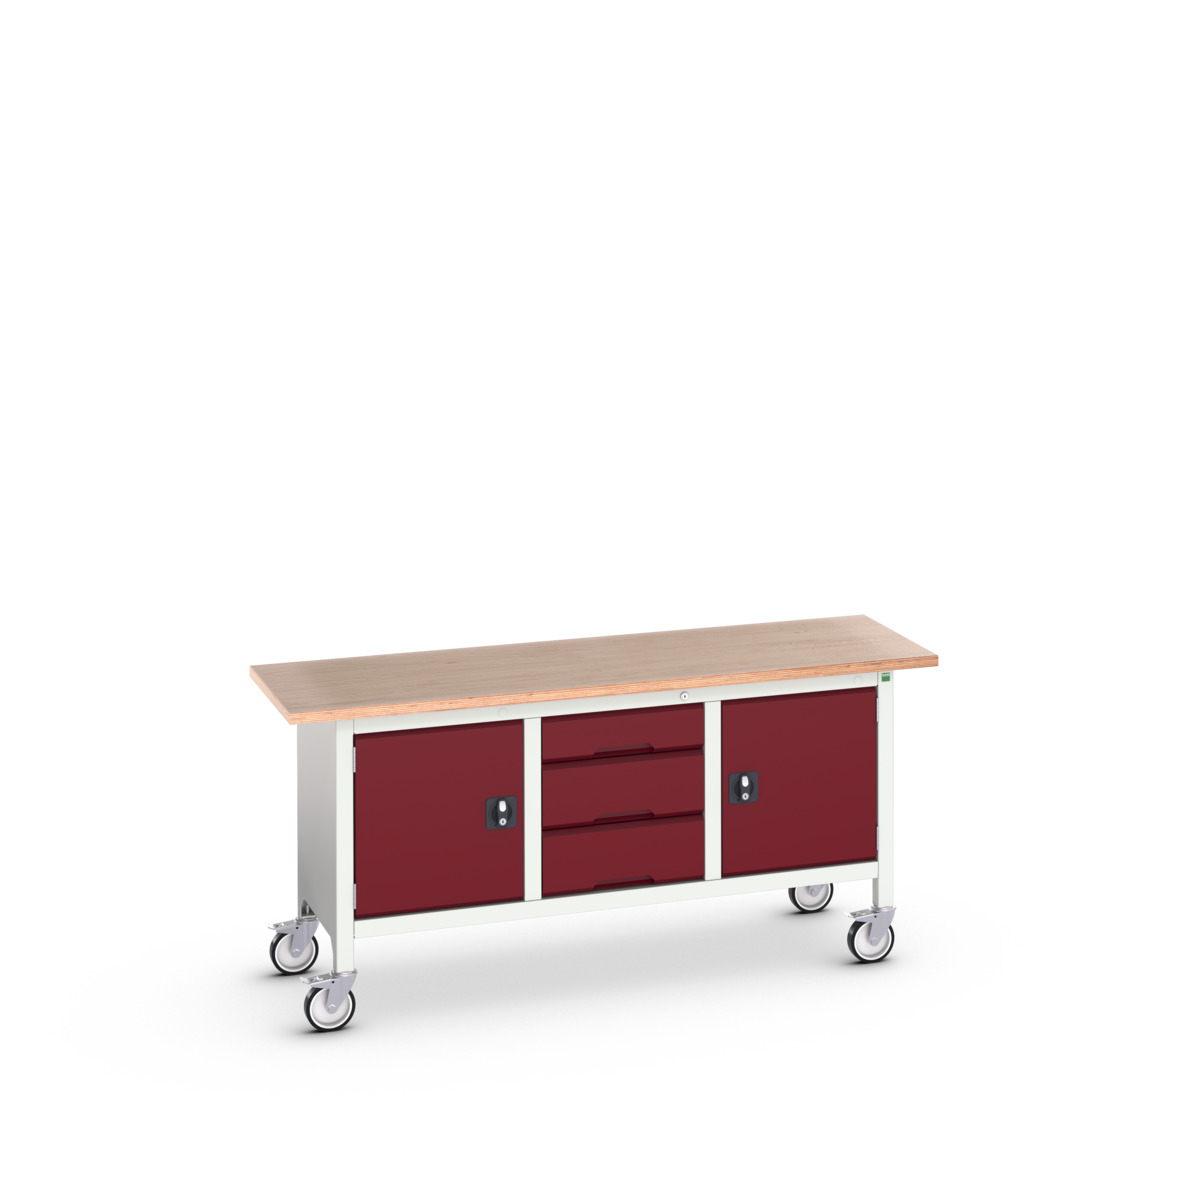 16923222.24 - verso mobile storage bench (mpx)